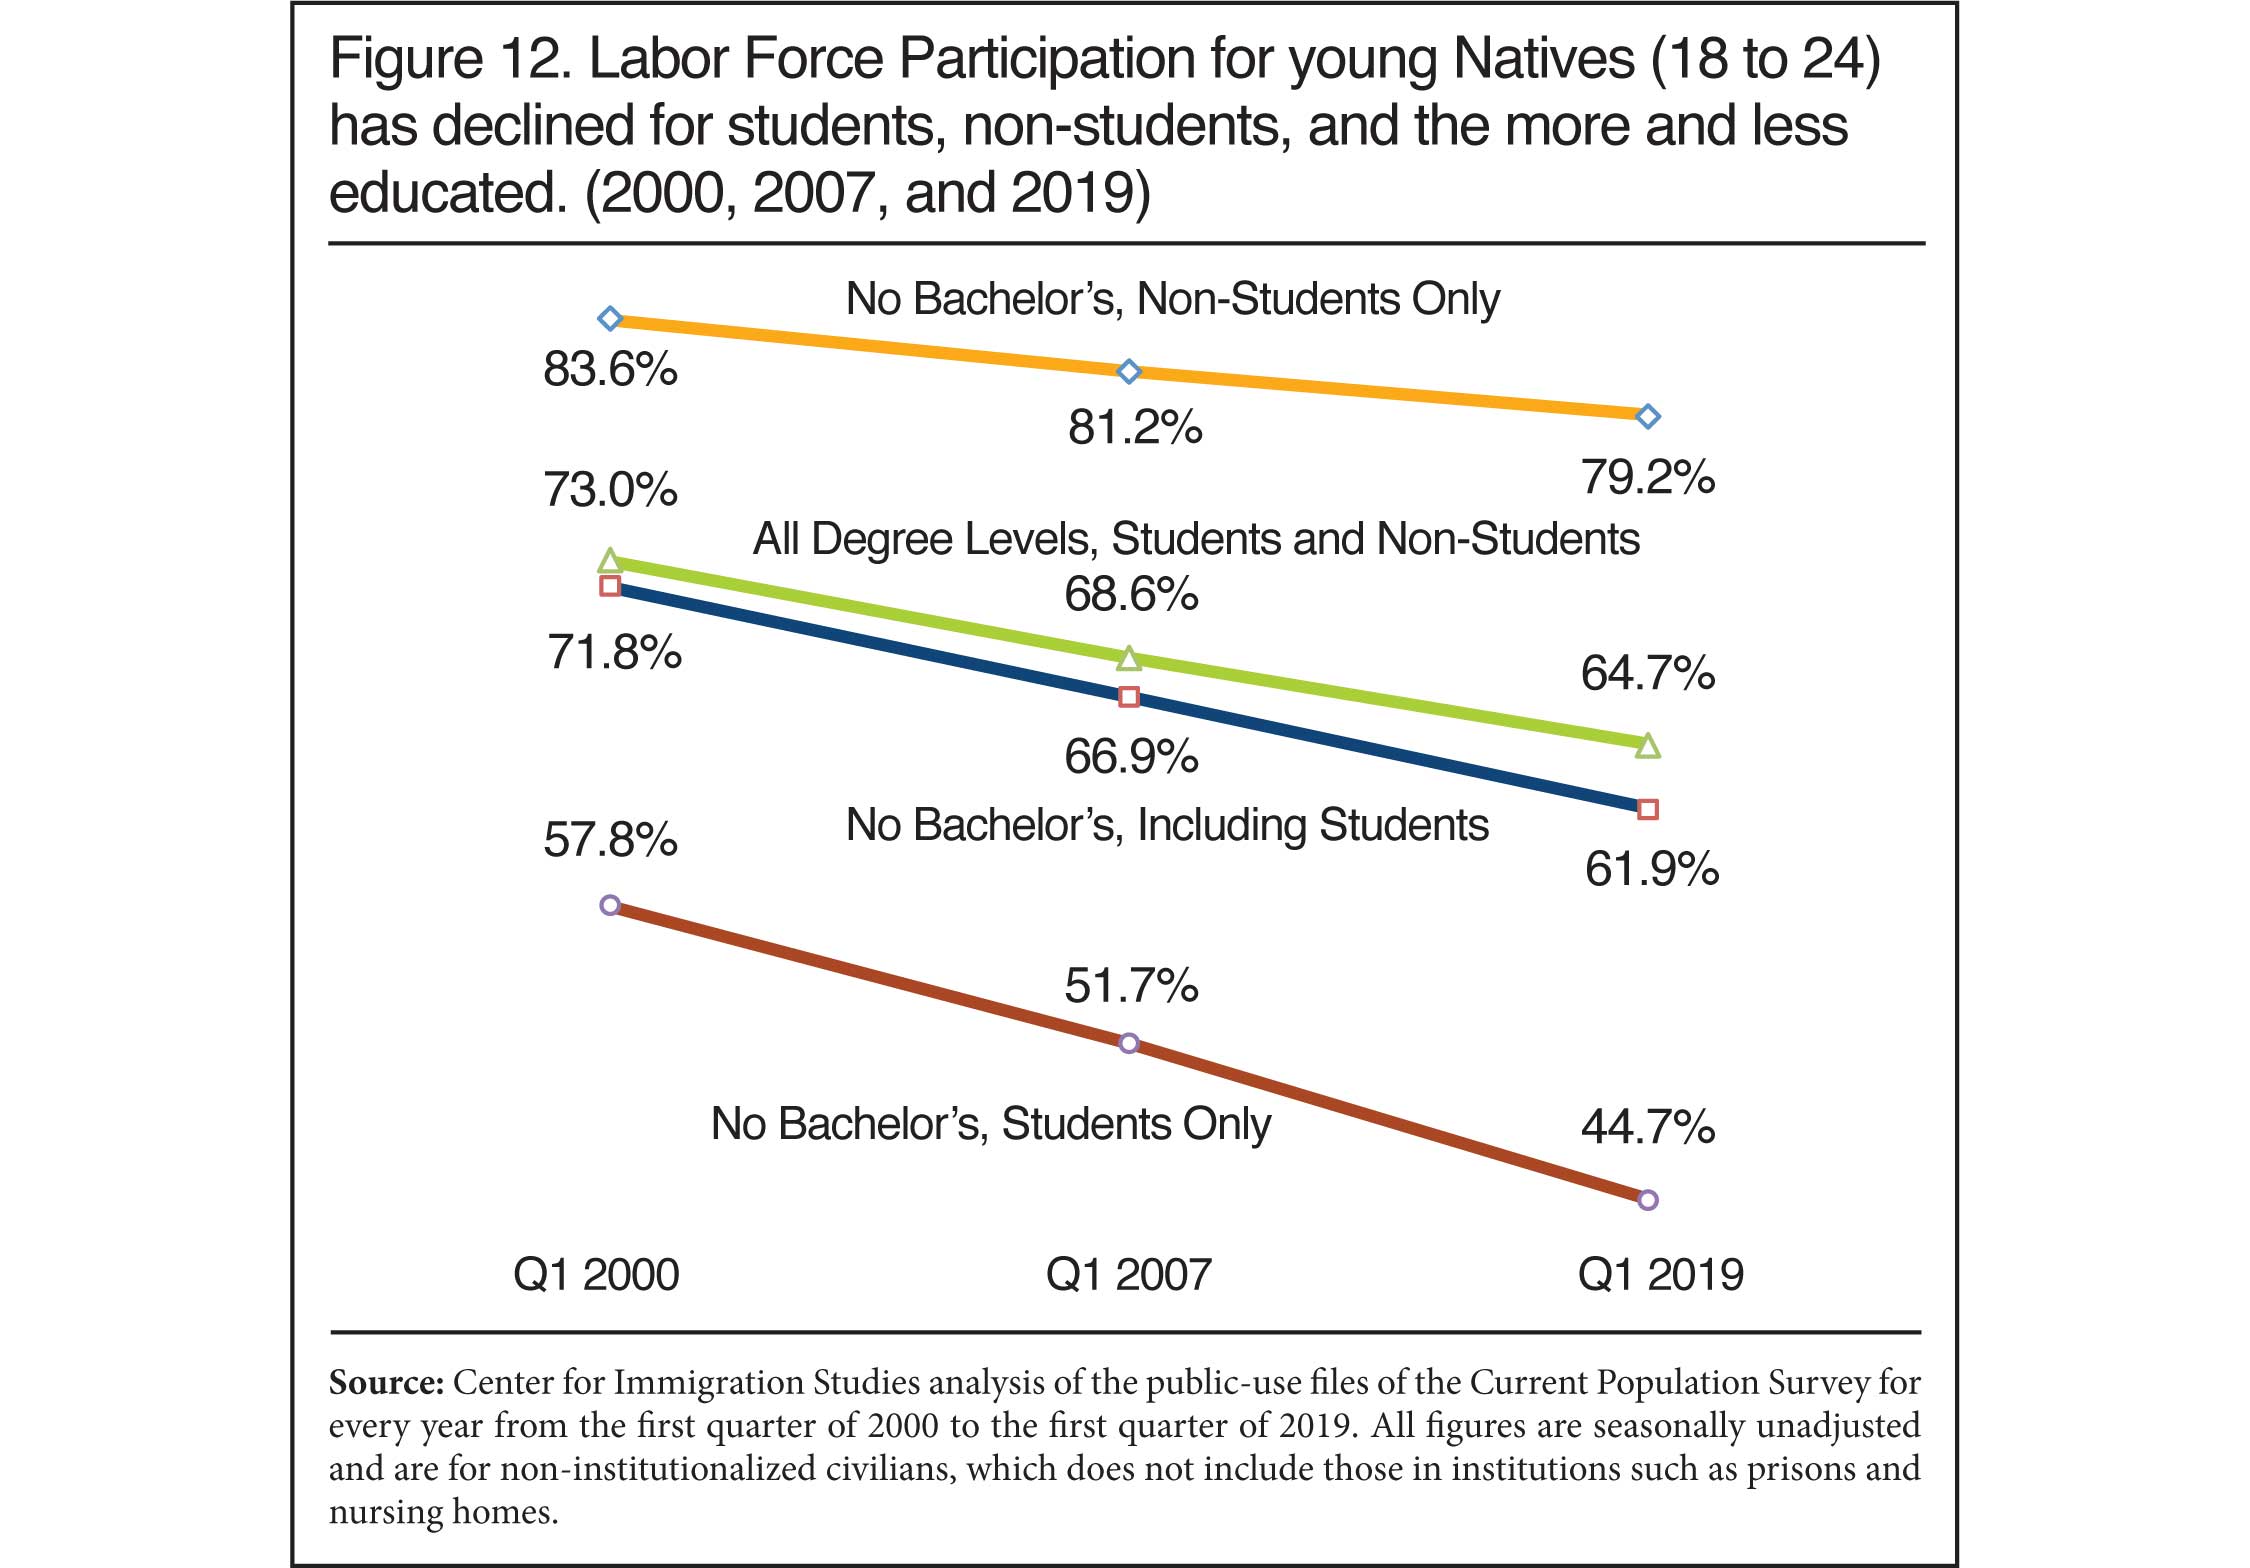 Graph: Labor force participation for young natives has declined for students, non-students, and the more and less educated